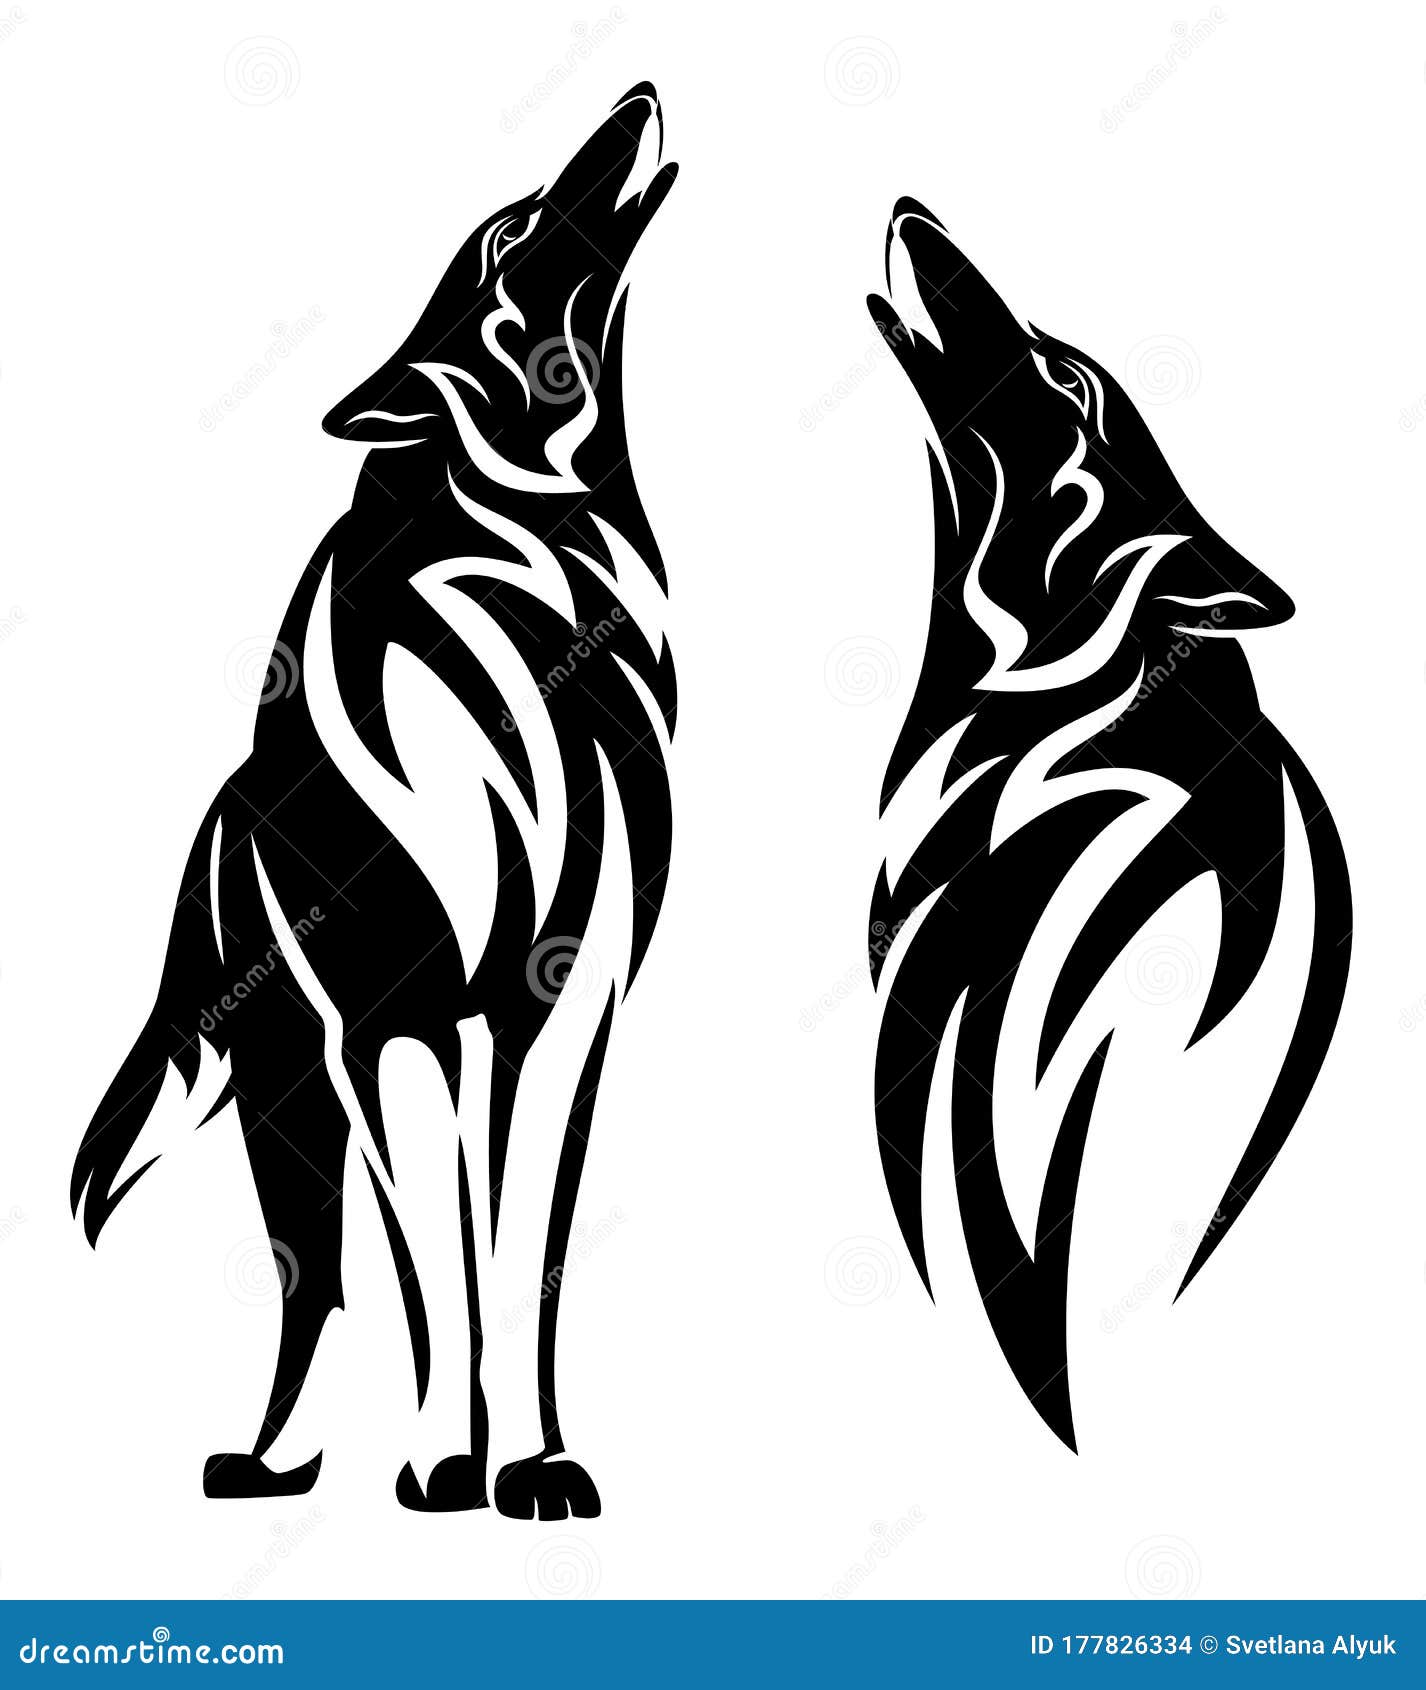 Details more than 87 howling wolf silhouette tattoo latest ...